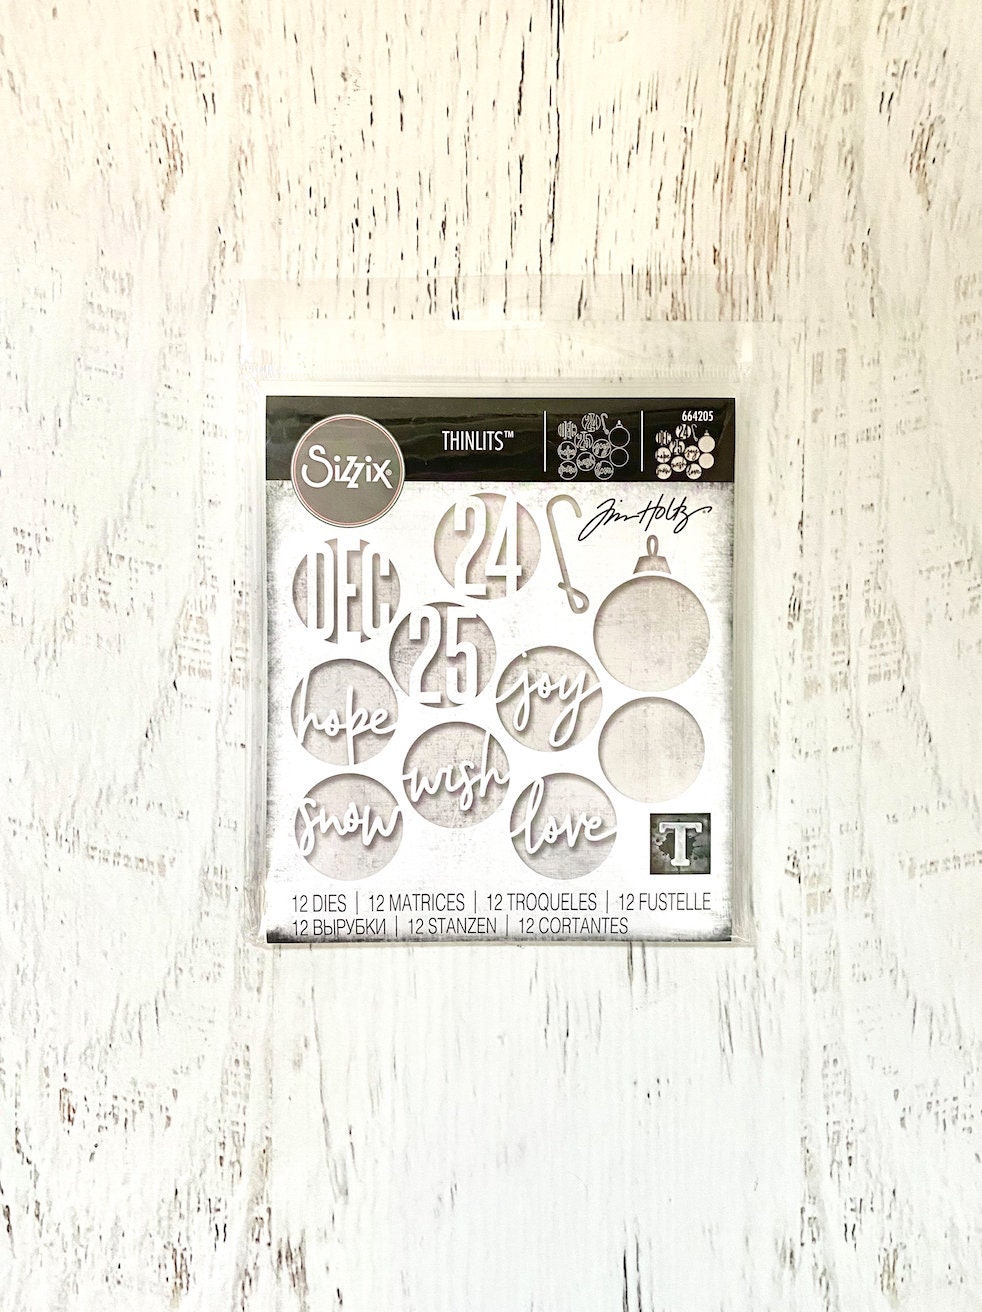 Tim Holtz/sizzix Texture Fades, Rosettes or Leafy Embossing Folders, 4  1/8x5 1/2, Card Making, Art Journaling, Paper Crafting, Mixed Media 